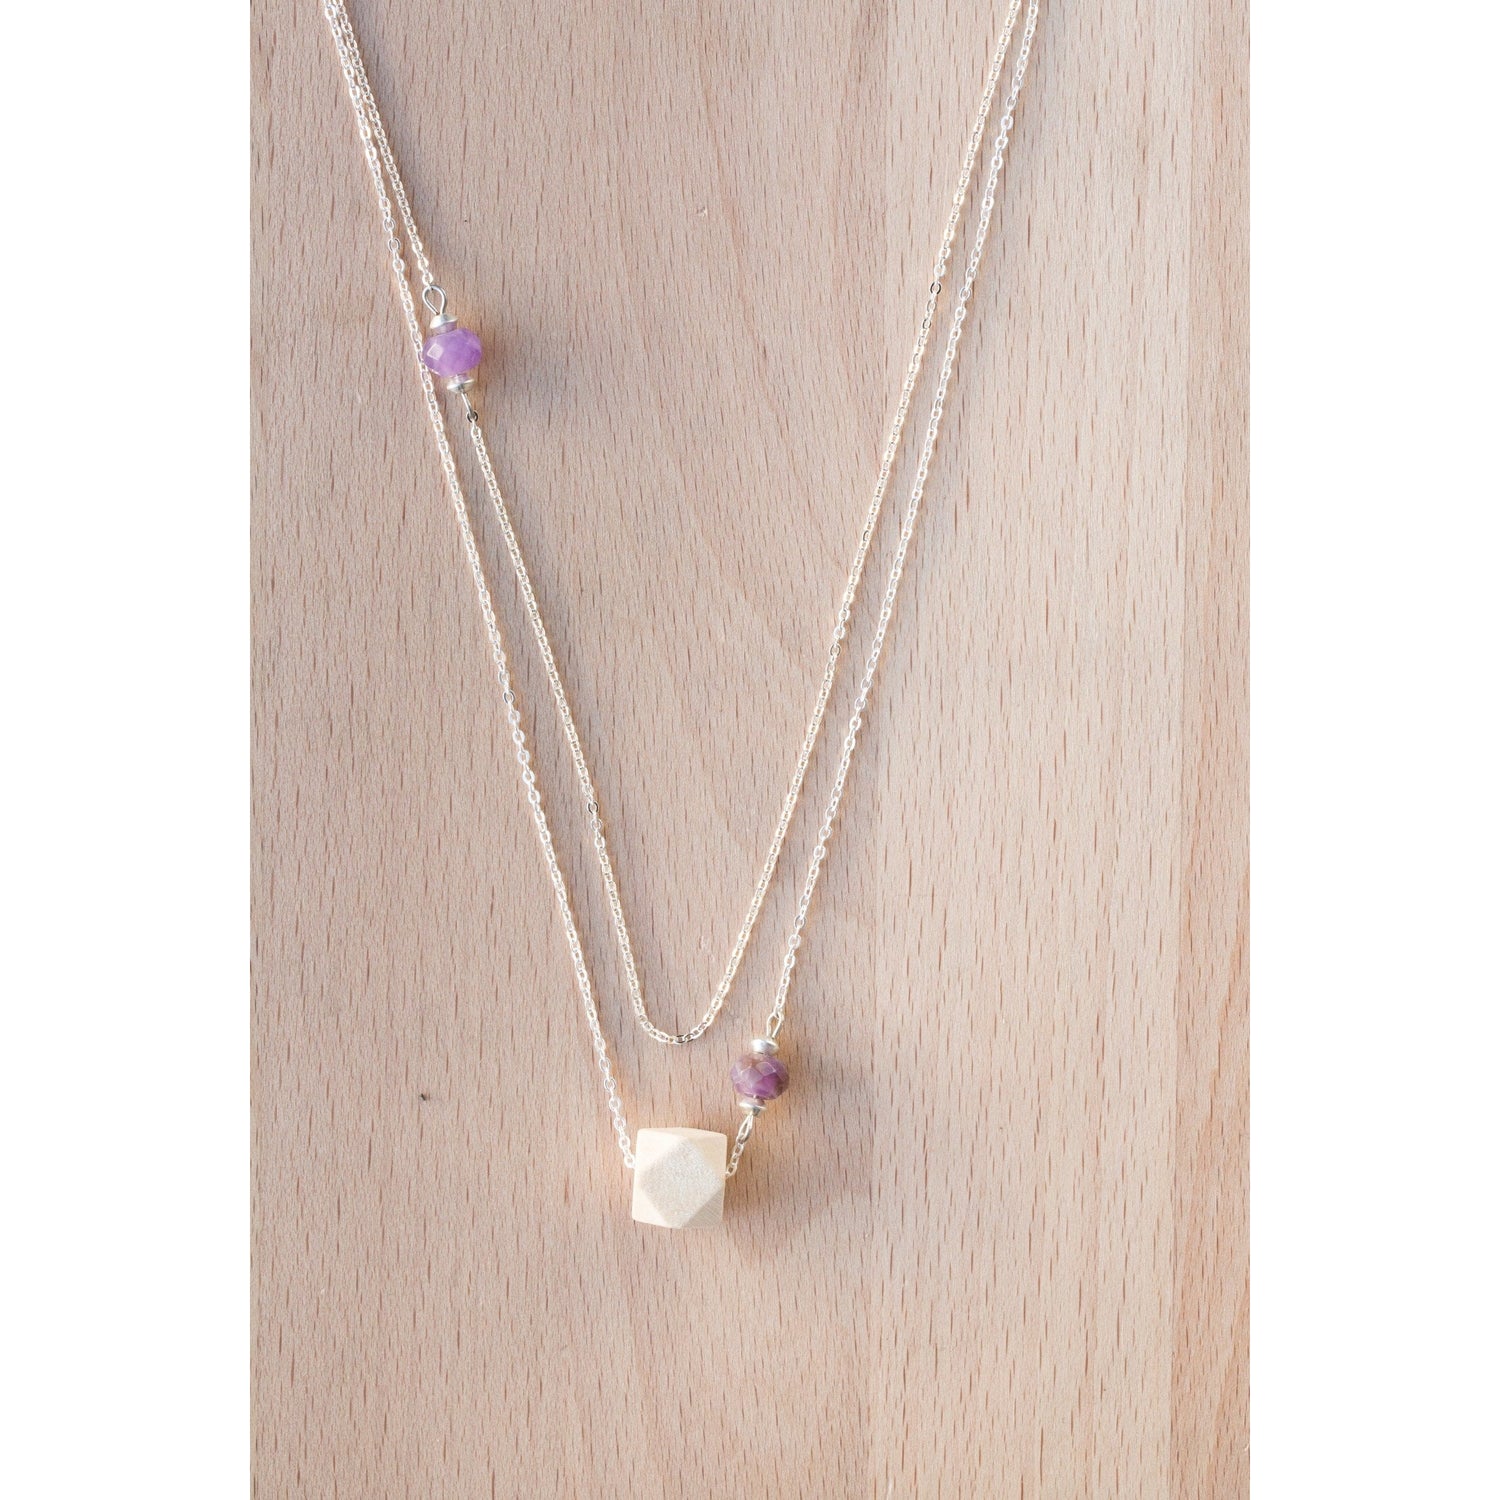 Layered Wood and Double Gemstone on Silver Chain - Tittup Unique Aromatherapy & Jewellery